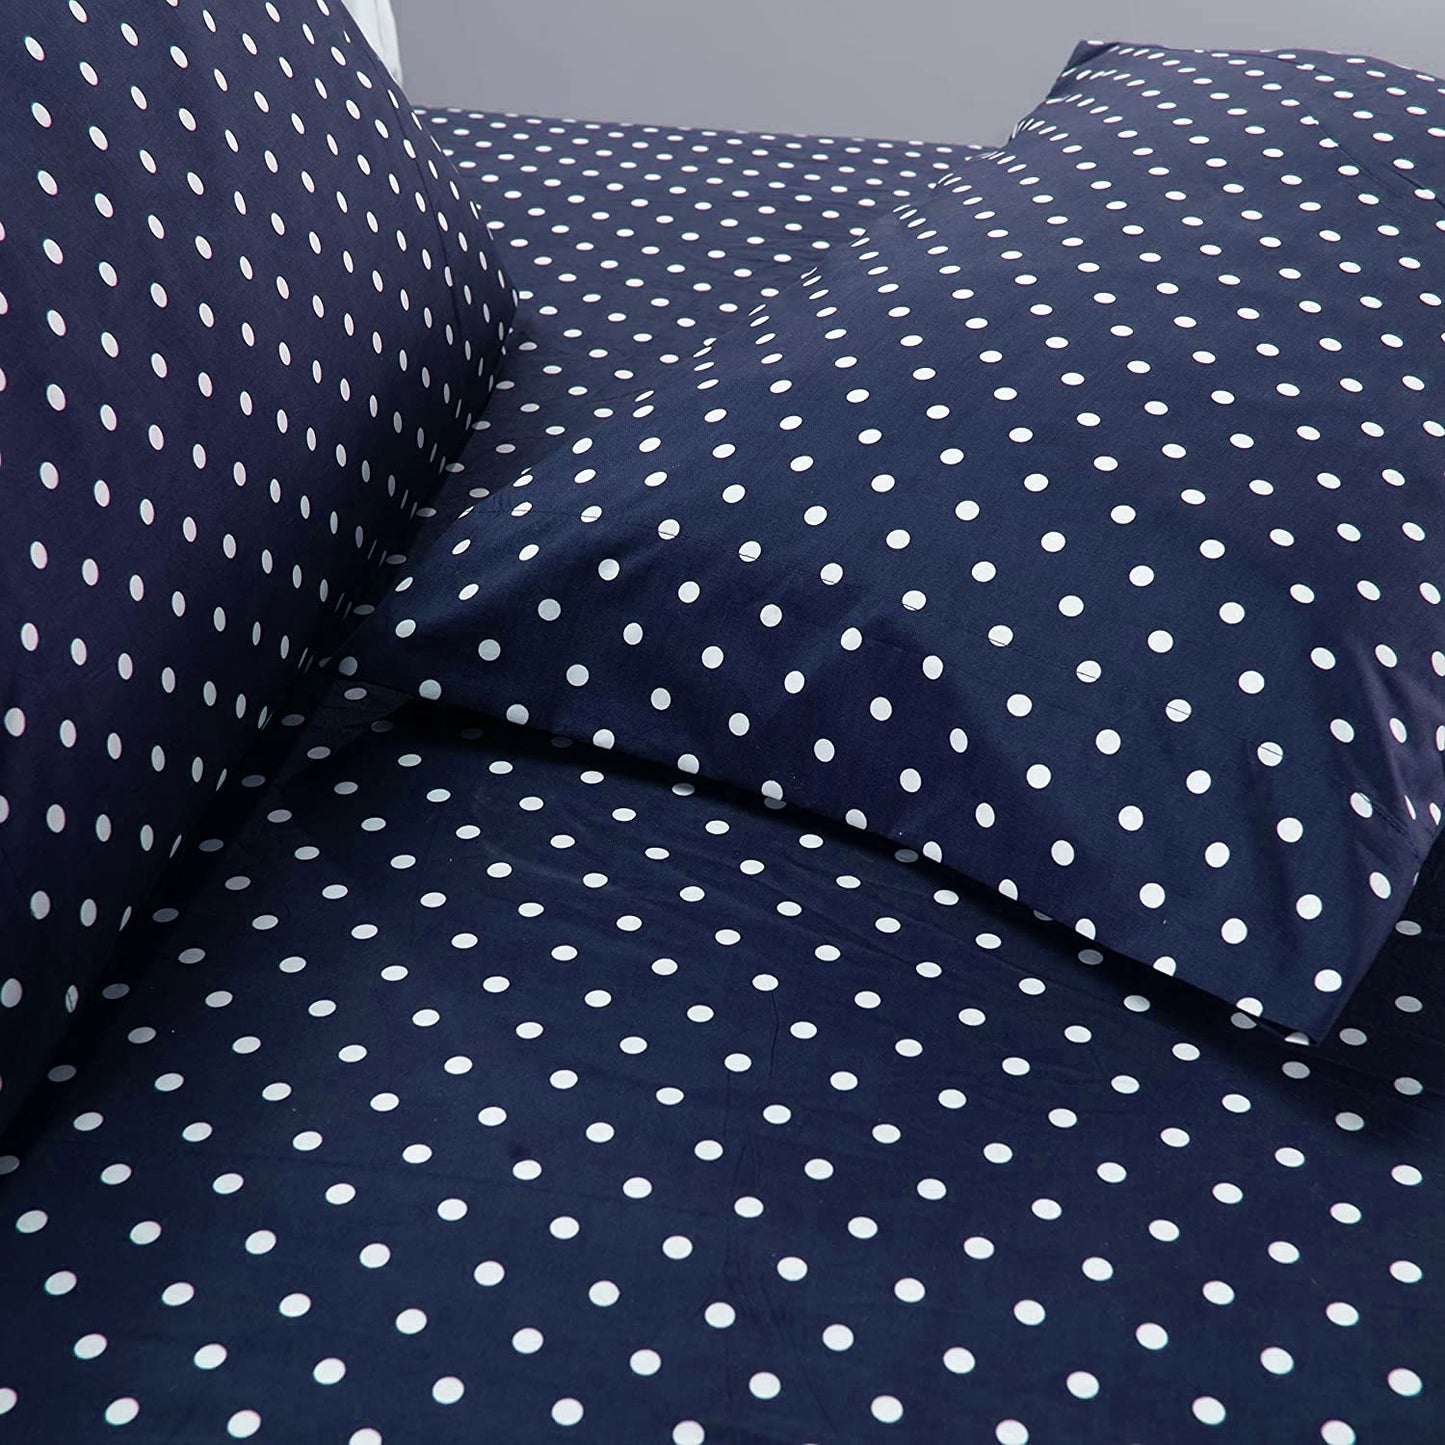 Fitted Bed Sheet-Blue Polka Apricot